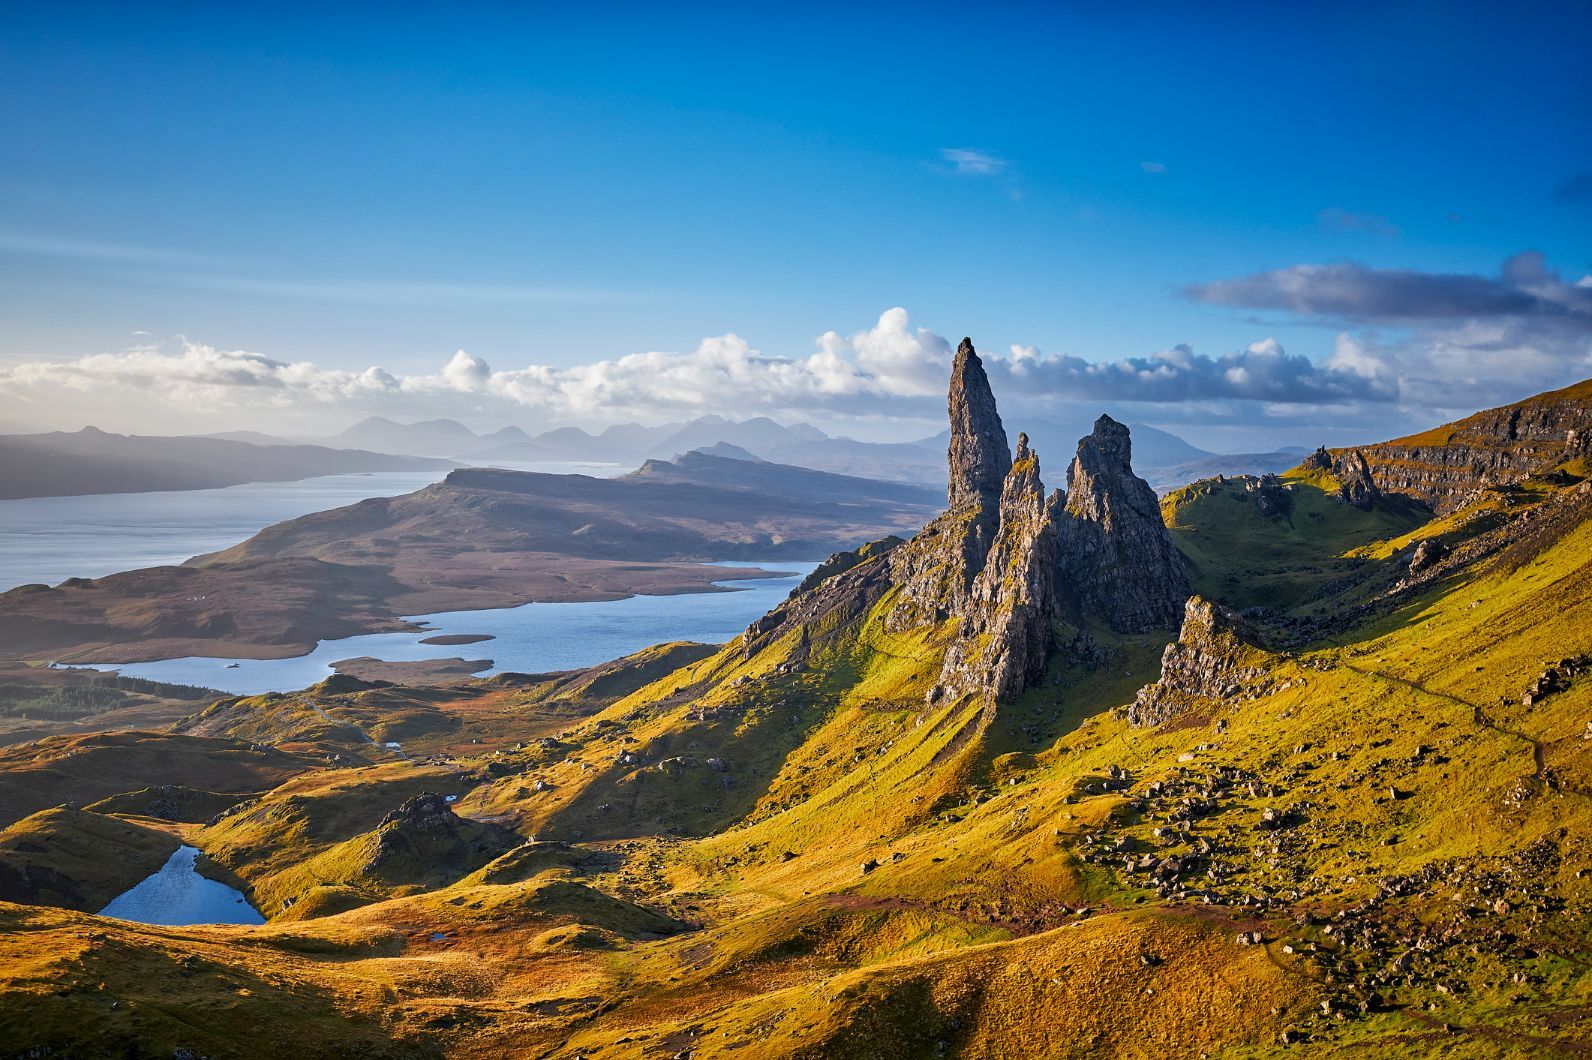 The Old Man of Storr, a popular hiking spot on the Isle of Skye in Scotland